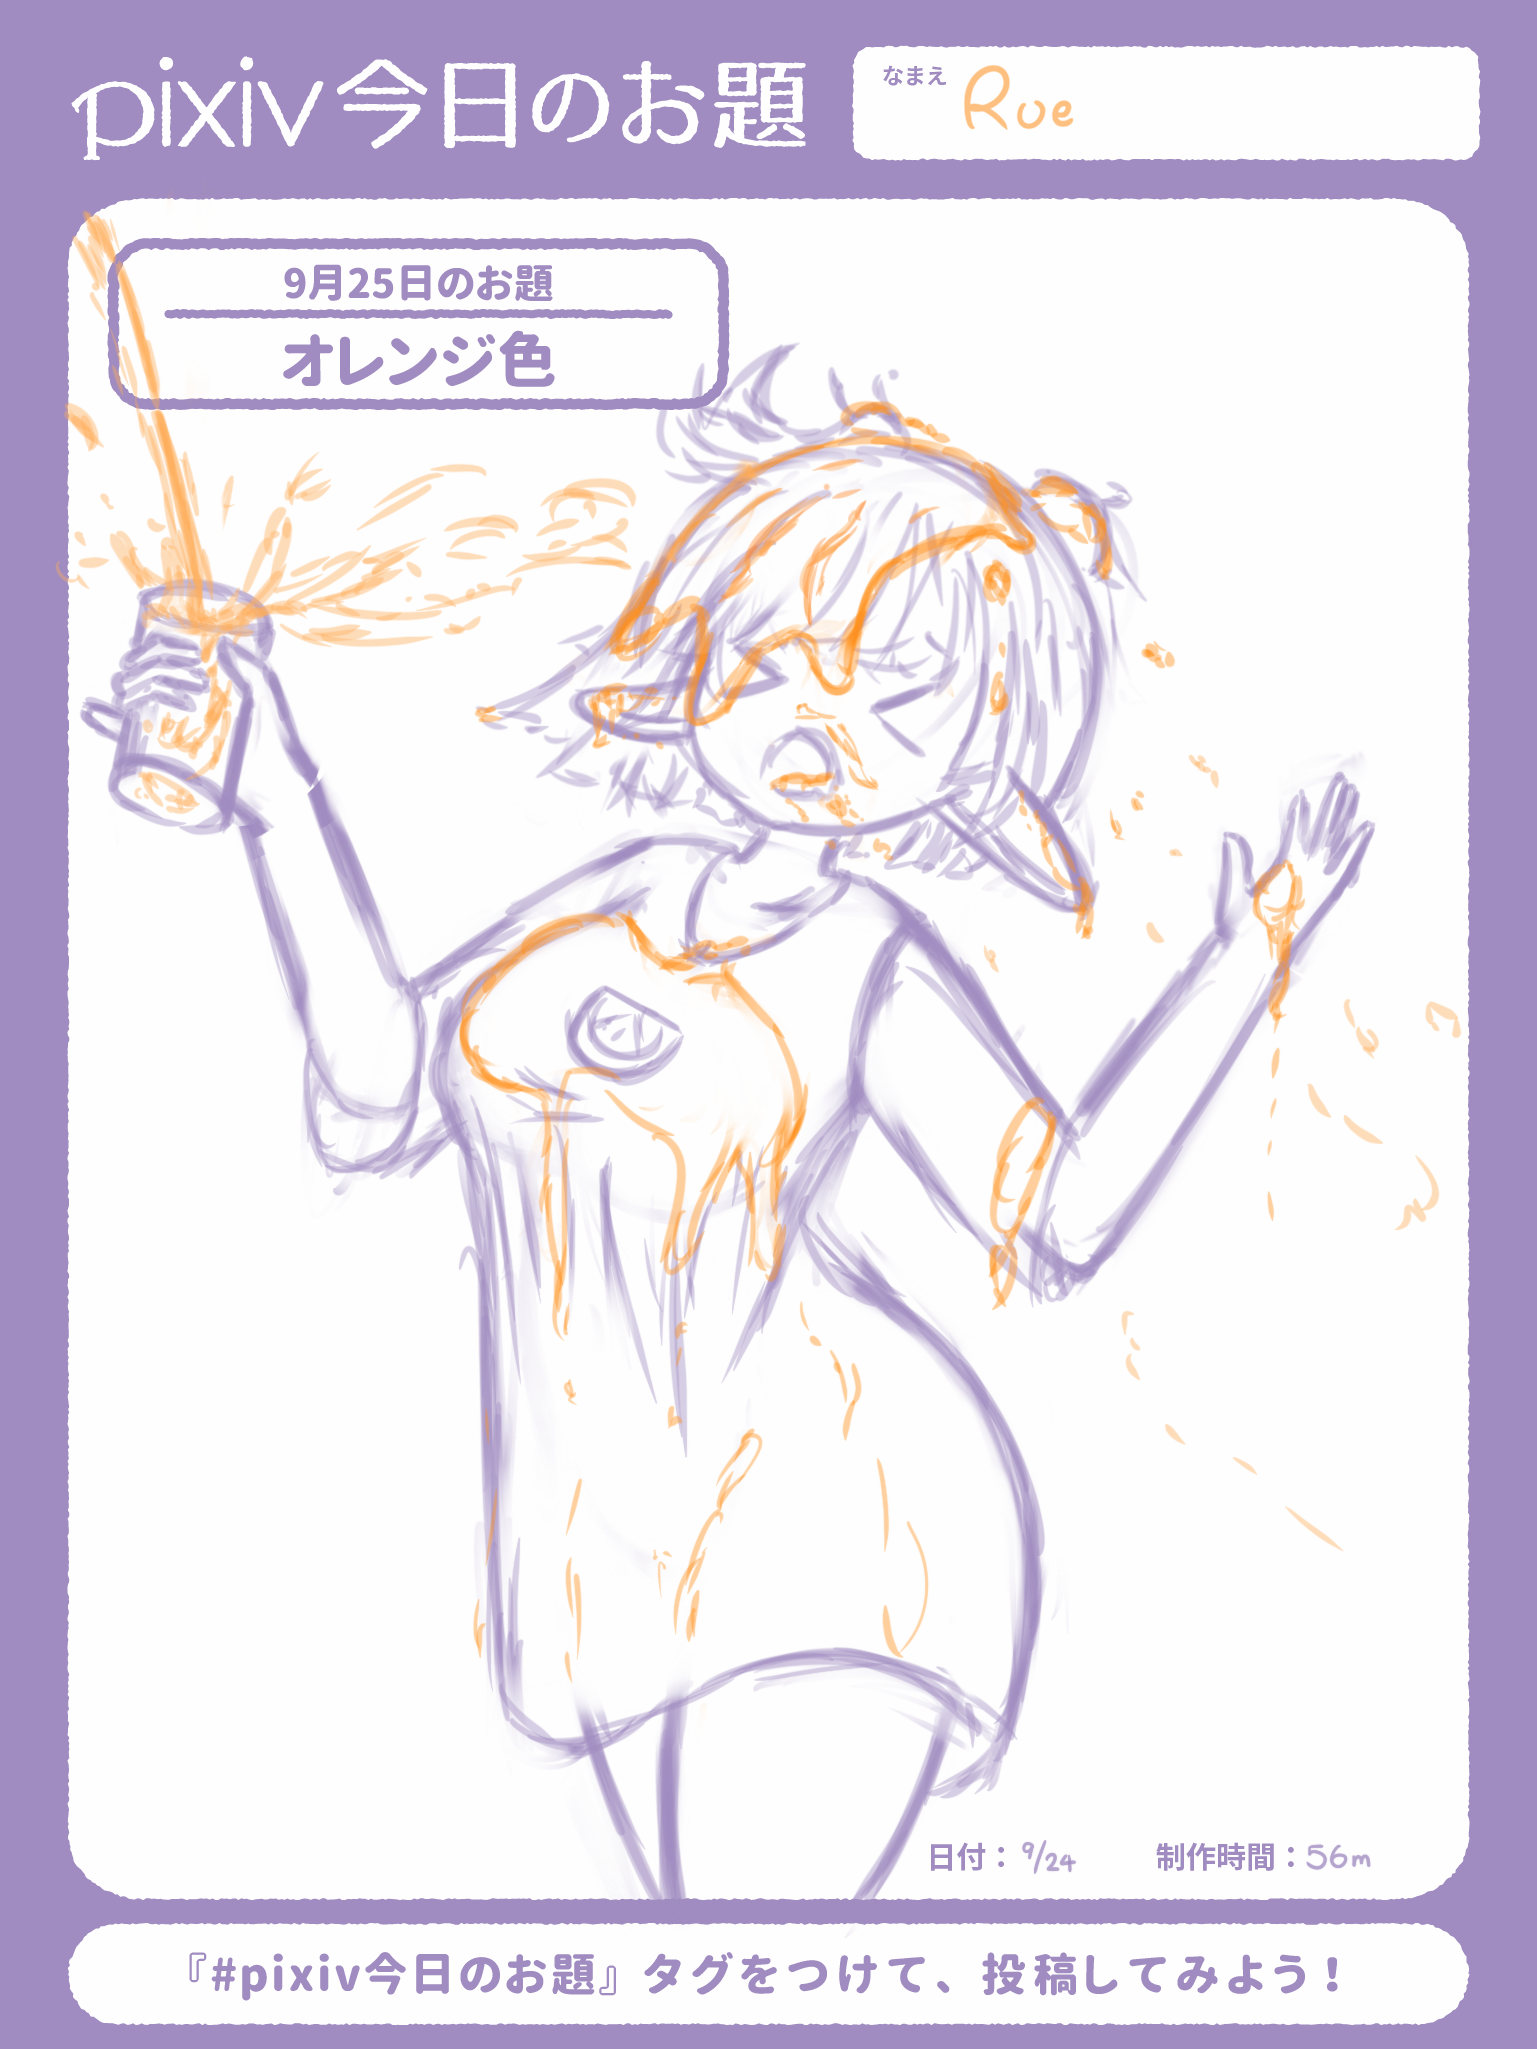 My pixiv sketch for today’s theme of #オレンジ色. It’s be being splashed by orange juice! Or something like that.